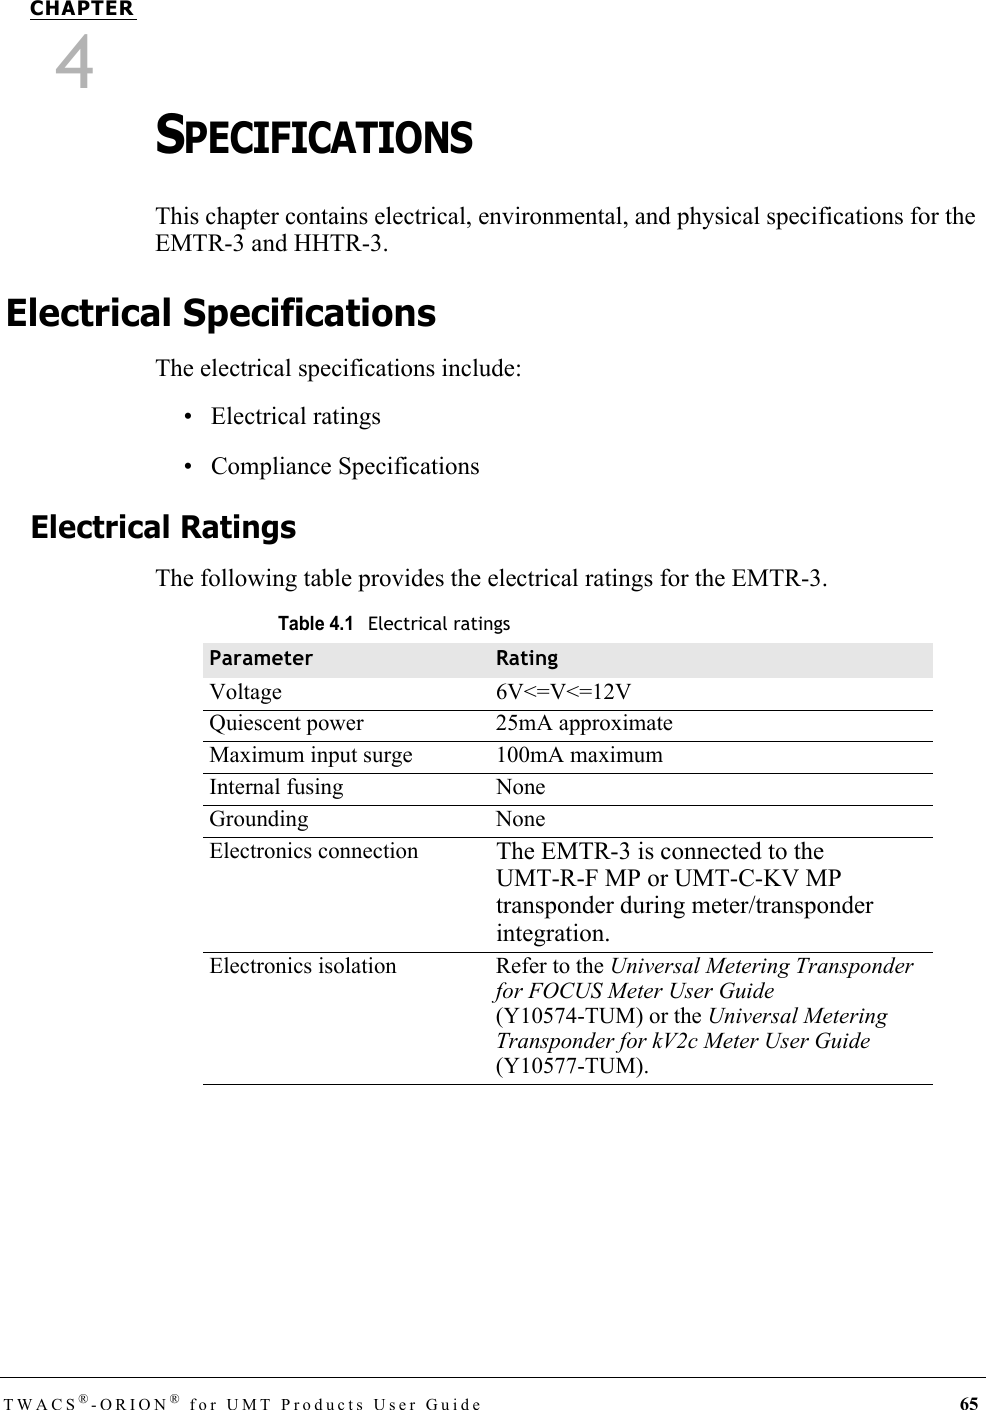 TWACS®-ORION® for UMT Products User Guide 65CHAPTER4SPECIFICATIONSThis chapter contains electrical, environmental, and physical specifications for the EMTR-3 and HHTR-3.Electrical SpecificationsThe electrical specifications include:• Electrical ratings• Compliance SpecificationsElectrical RatingsThe following table provides the electrical ratings for the EMTR-3.Table 4.1Electrical ratingsParameter RatingVoltage 6V&lt;=V&lt;=12VQuiescent power 25mA approximateMaximum input surge 100mA maximumInternal fusing NoneGrounding NoneElectronics connection The EMTR-3 is connected to the UMT-R-F MP or UMT-C-KV MP transponder during meter/transponder integration.Electronics isolation Refer to the Universal Metering Transponder for FOCUS Meter User Guide (Y10574-TUM) or the Universal Metering Transponder for kV2c Meter User Guide (Y10577-TUM).DRAFT